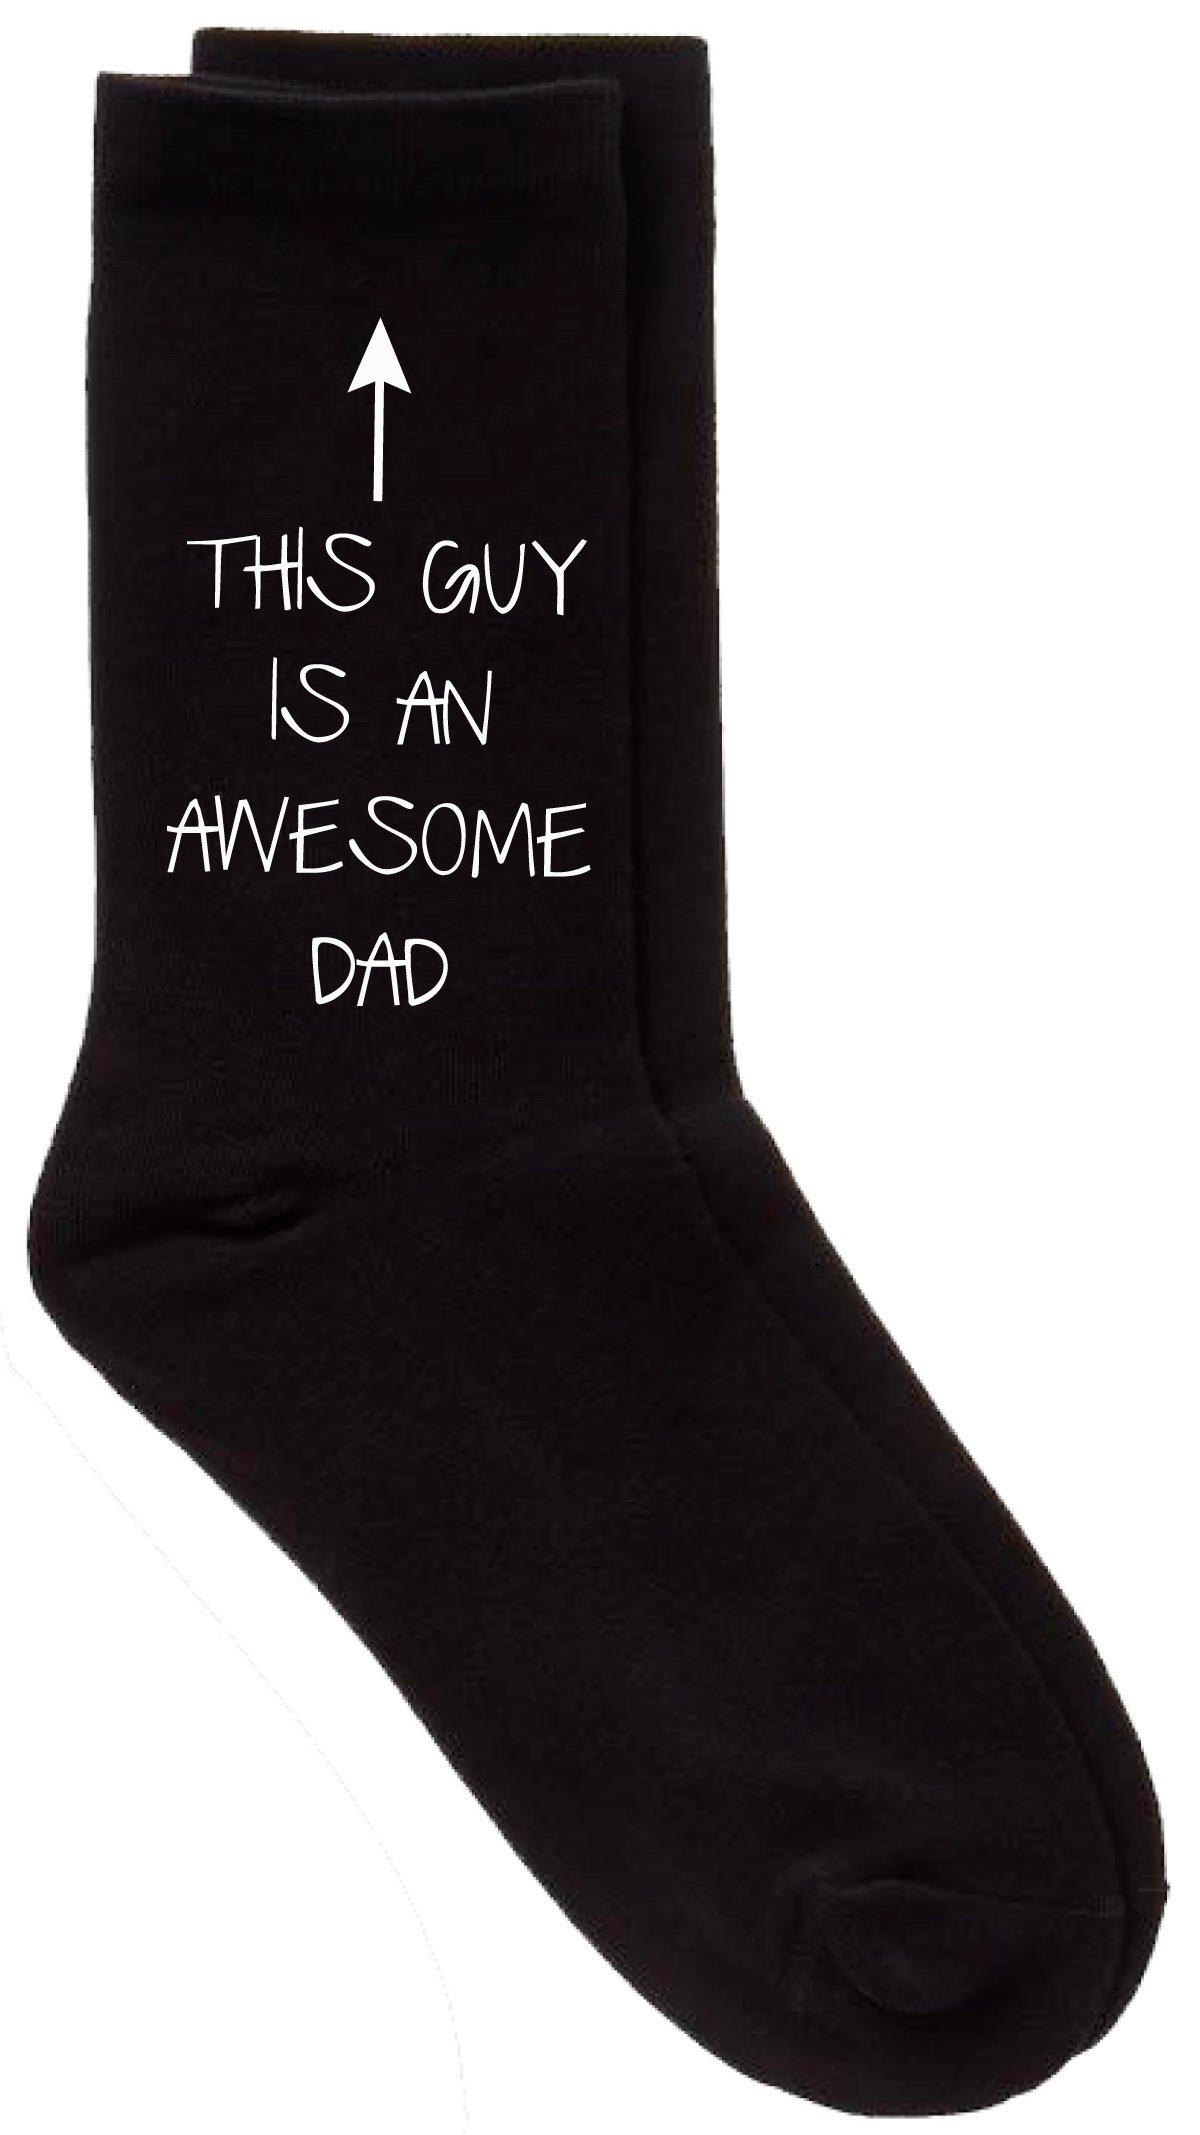 This Guy Is An Awesome Dad Mens Black Socks